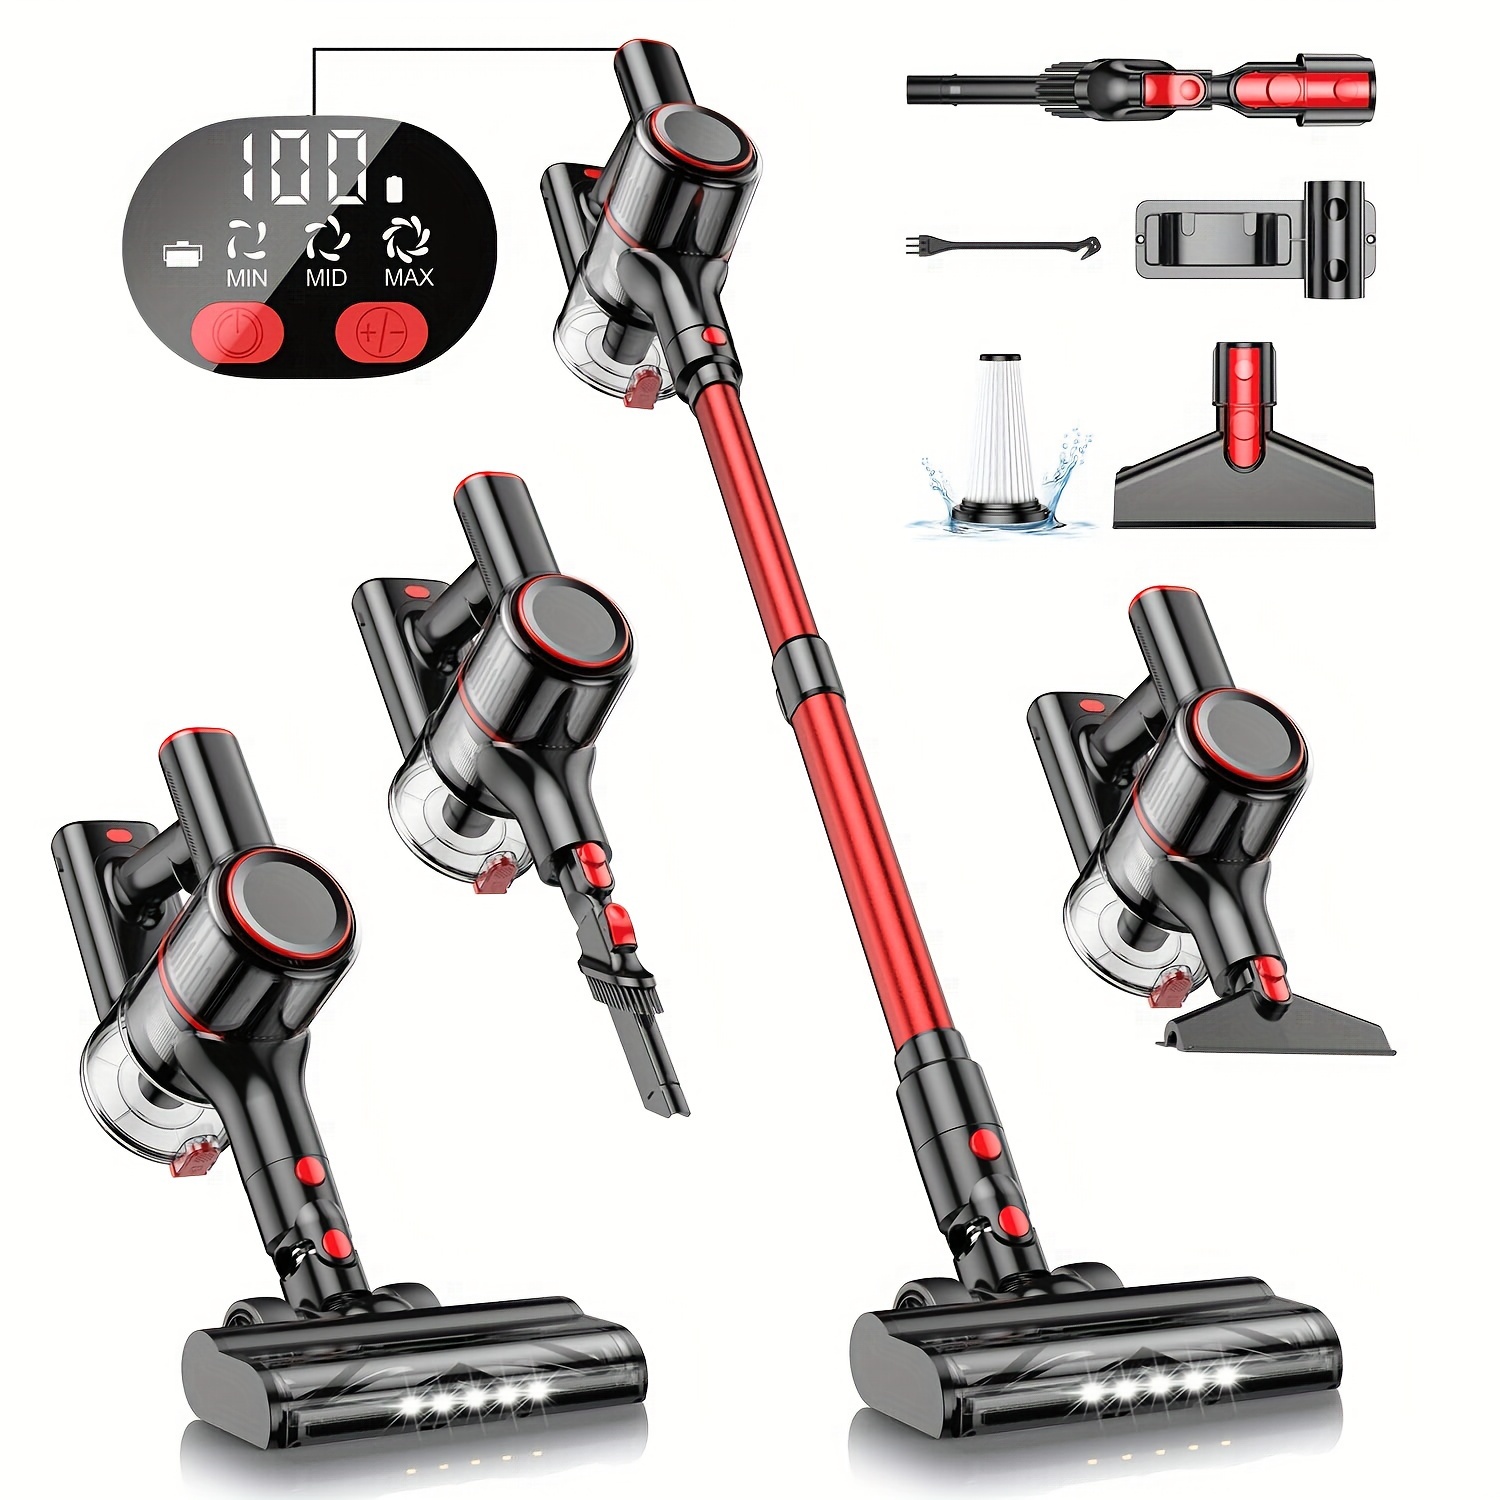 

Cordless Vacuum Cleaner, 8 In 1 Powerful Suction Stick Vacuum With Led Display, 3 Suction Modes, Anti-tangle Lightweight Vacuum Cleaner For Home, Hard Floors, Carpets, Pet Hair, Red